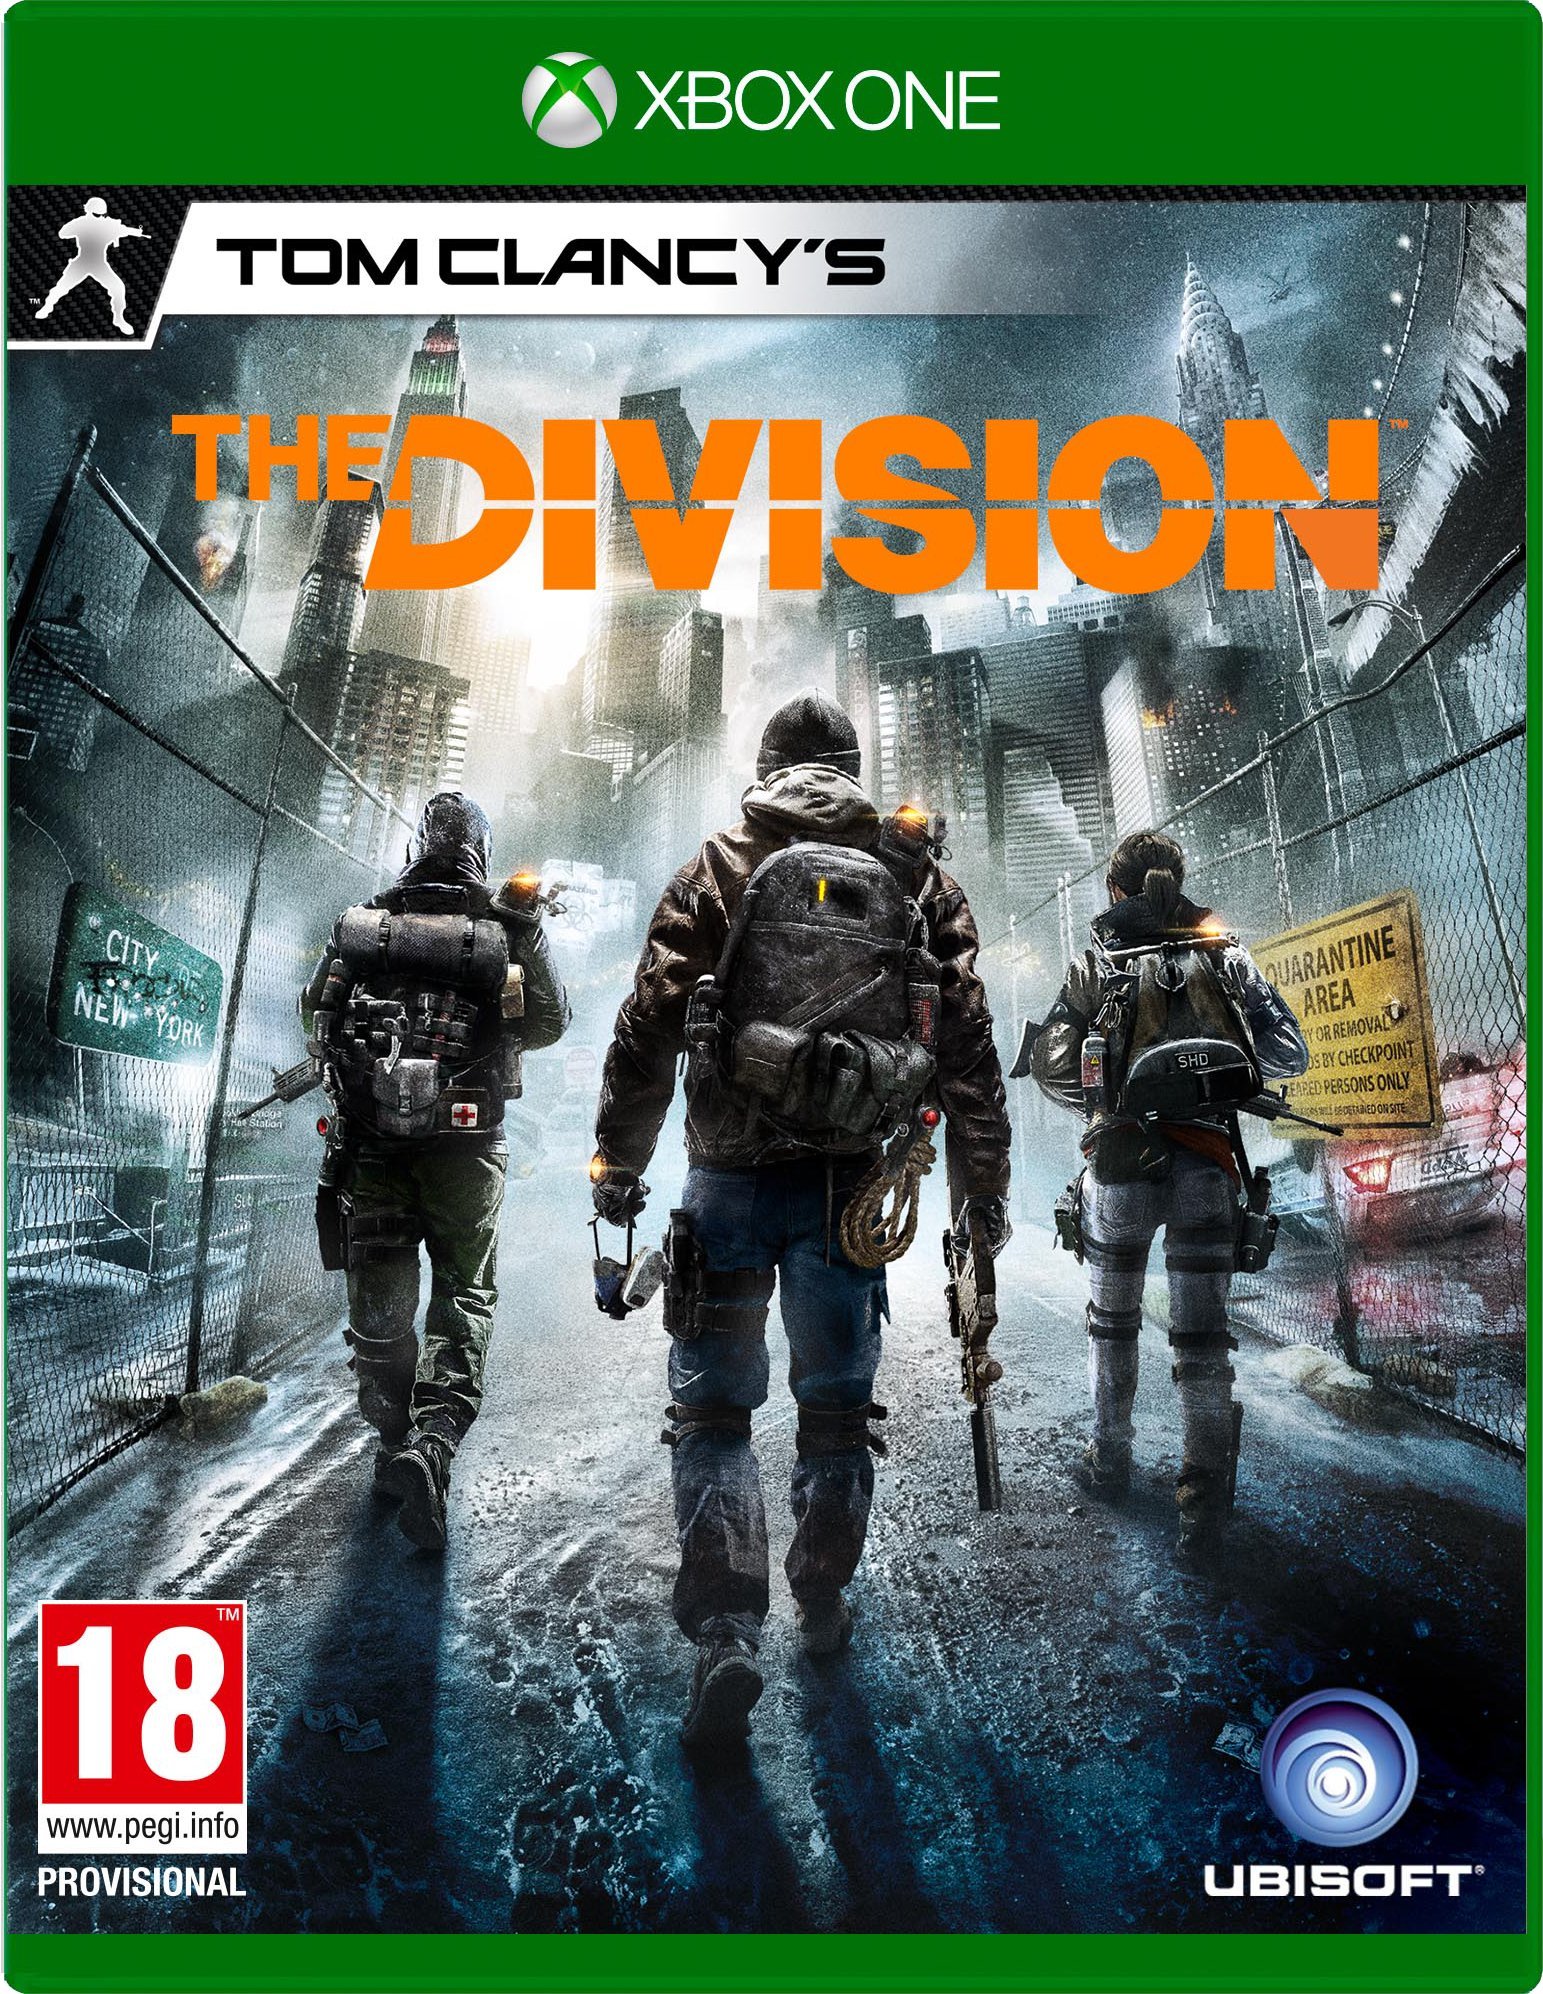 Tom Clancy's The Division (Xbox One), Ubisoft